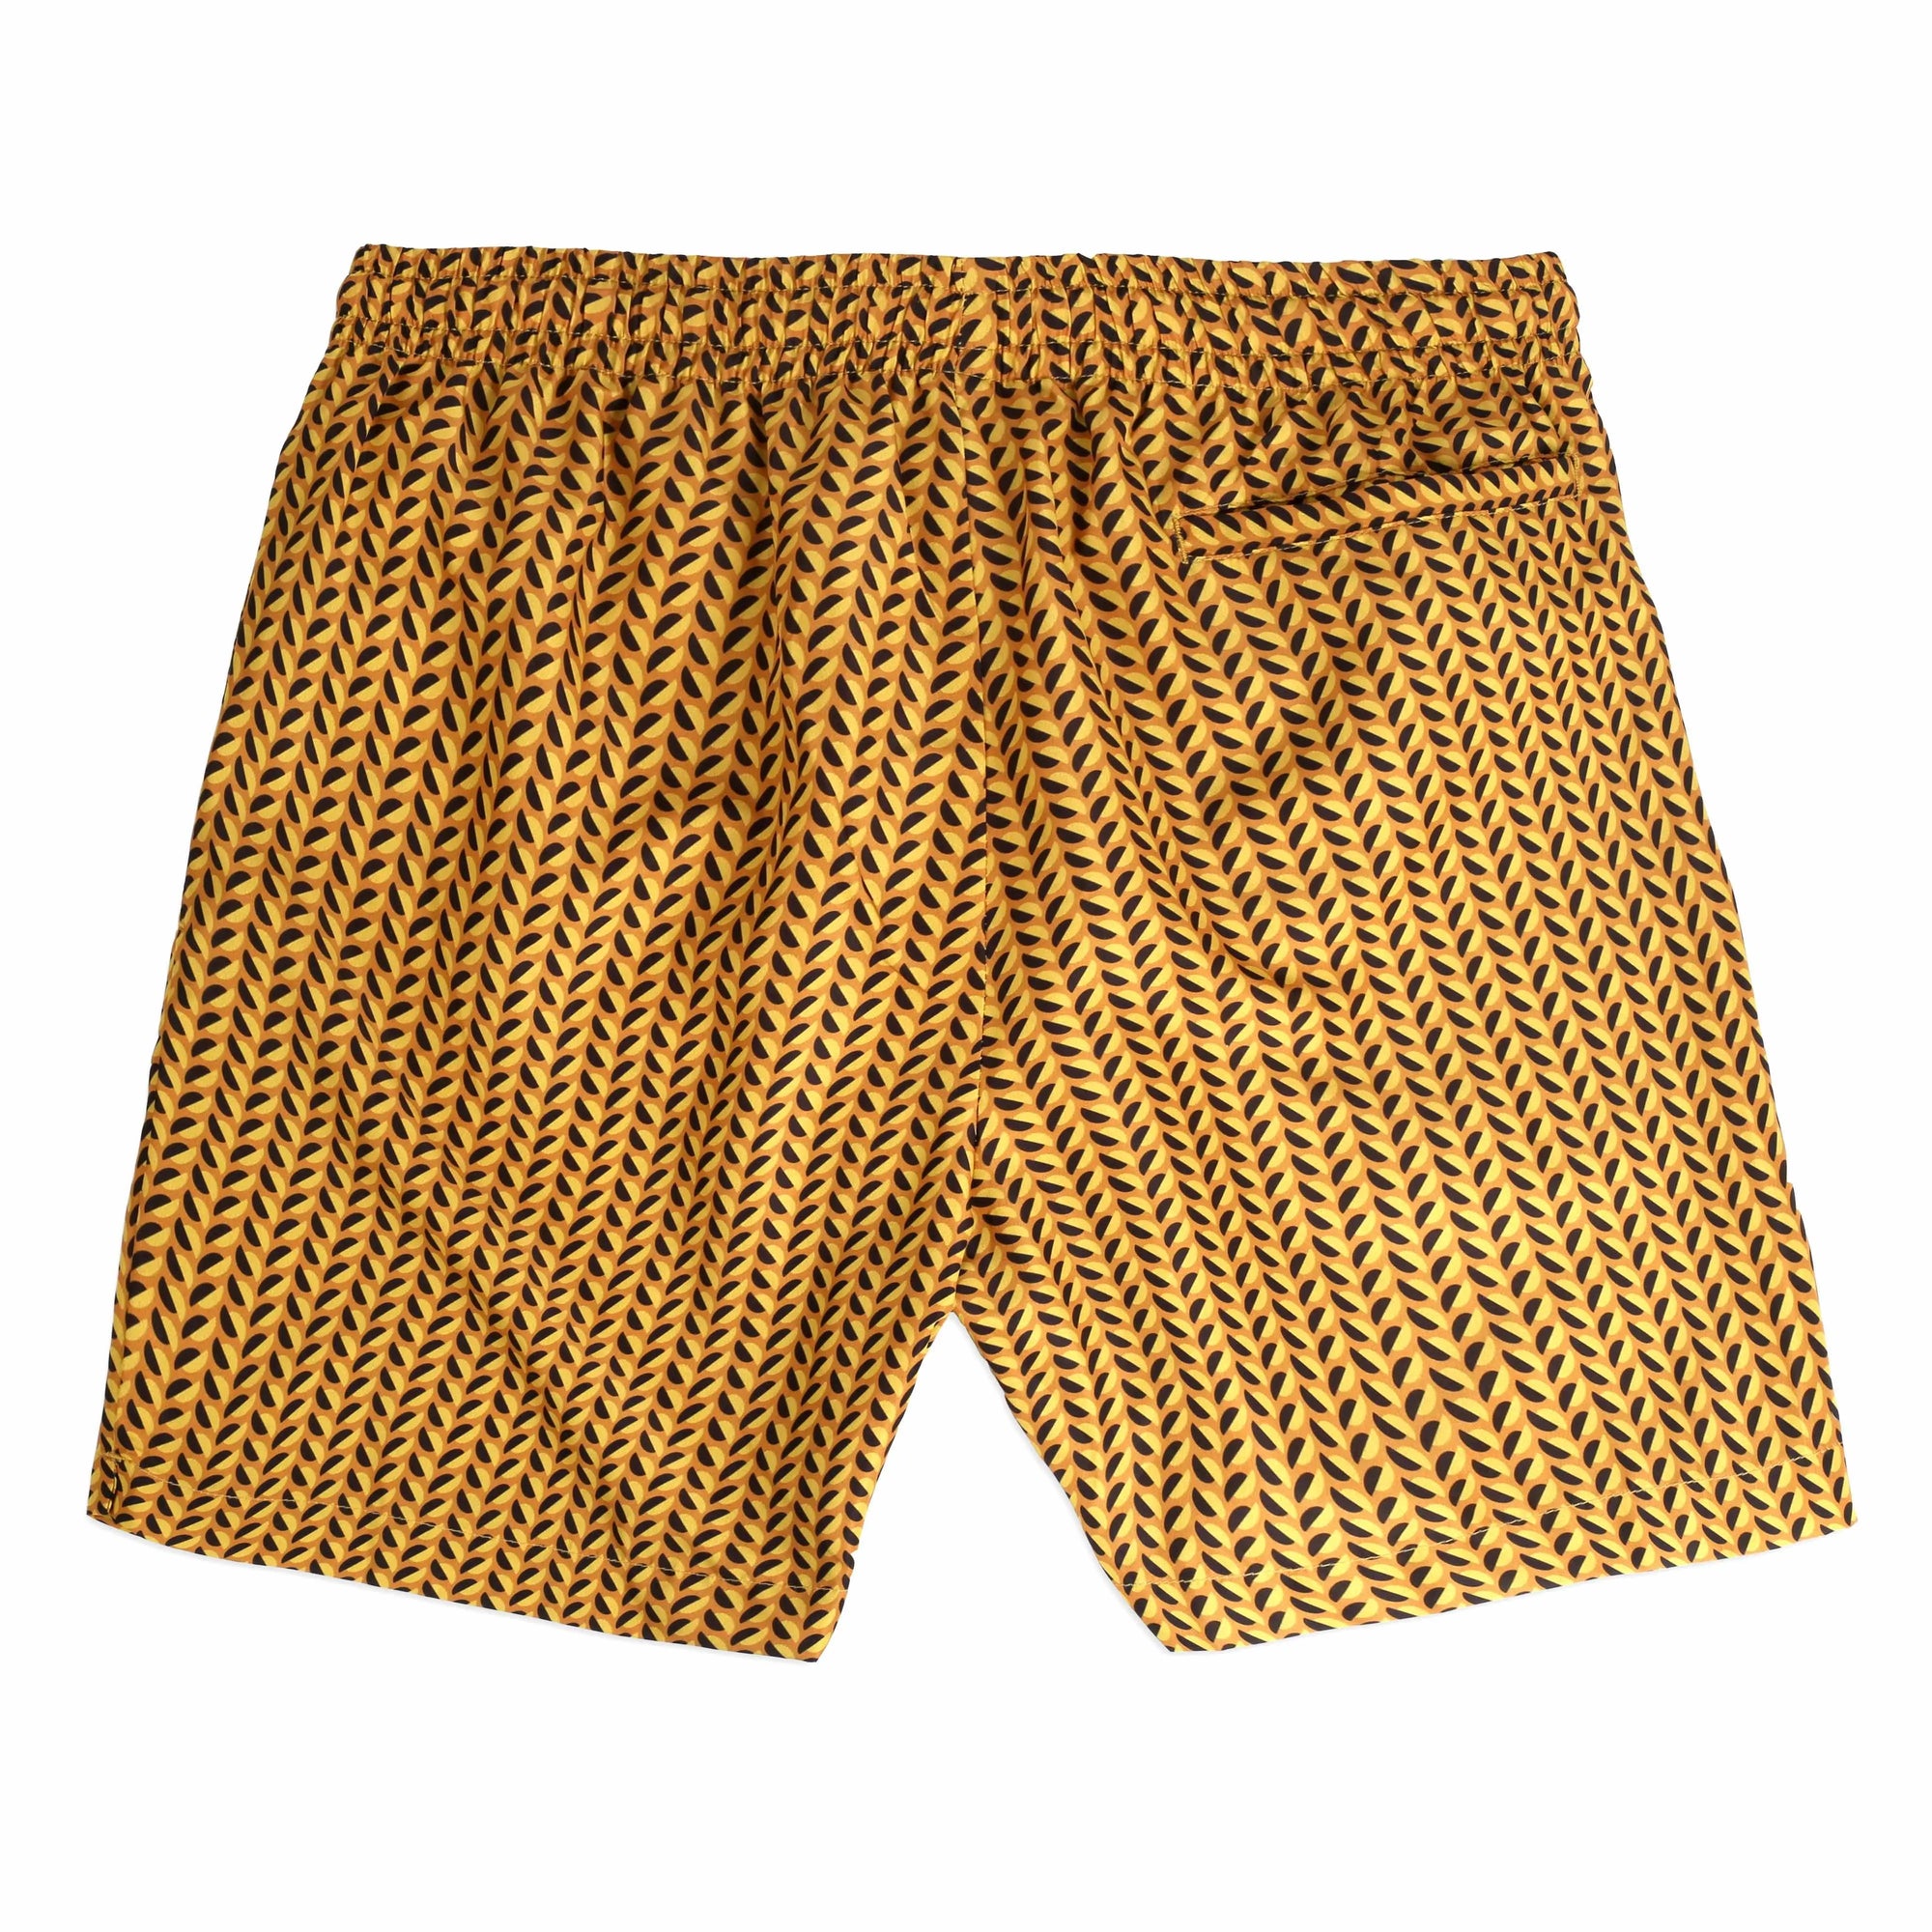 A pair of Clams yellow Swimwear featuring yellow and black leaf-like designs is neatly placed inside an open white box. The box lid, positioned on the left, showcases the brand name "Bassal." An orange cord is also visible, along with a tag featuring the brand name and "bassalstore" from Barcelona.